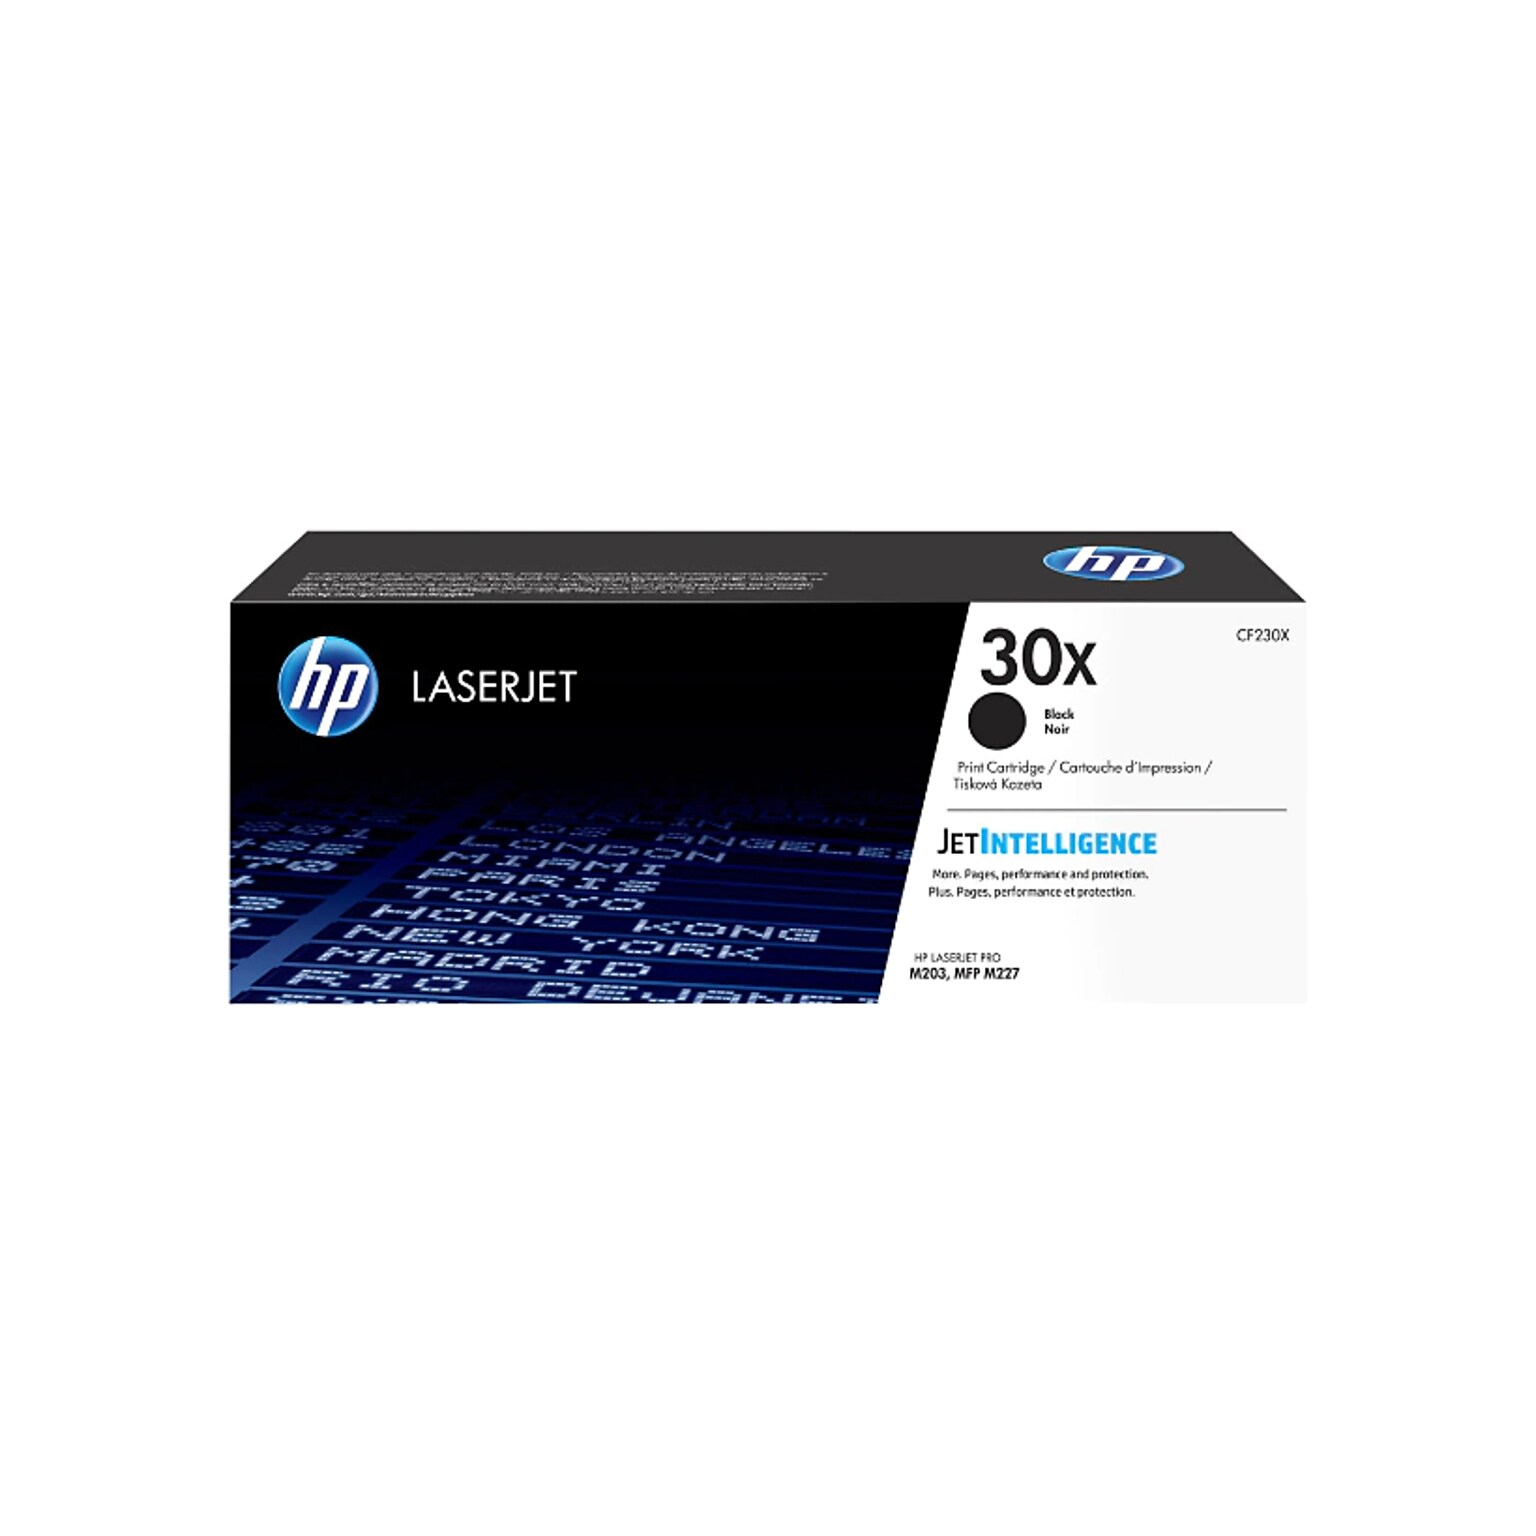 HP 30X Black High Yield Toner Cartridge,   print up to 3500 pages